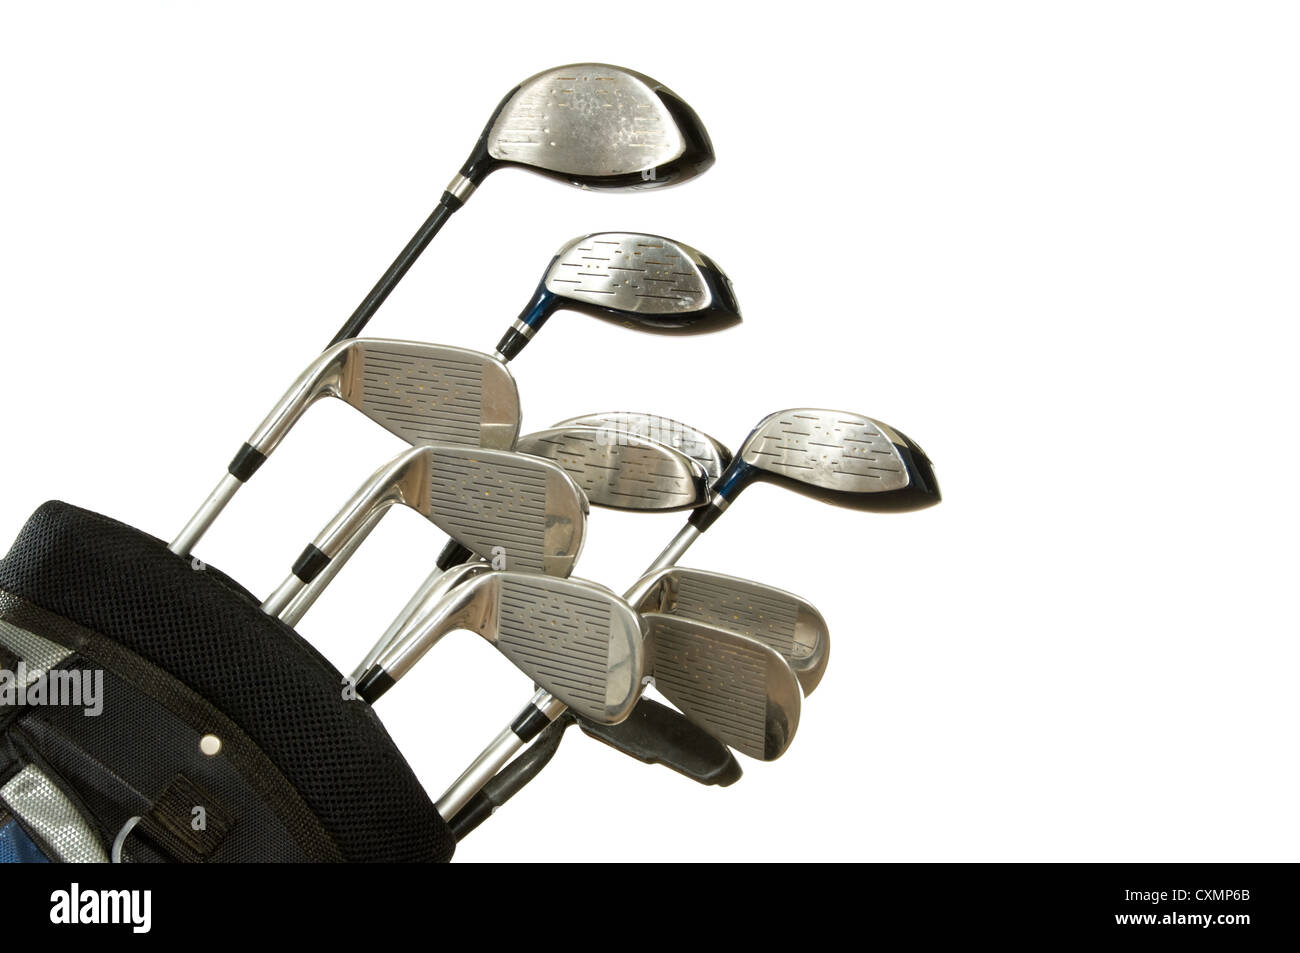 Set of Golf clubs on white background, including irons, metal woods and a  putter in a golf bag Stock Photo - Alamy